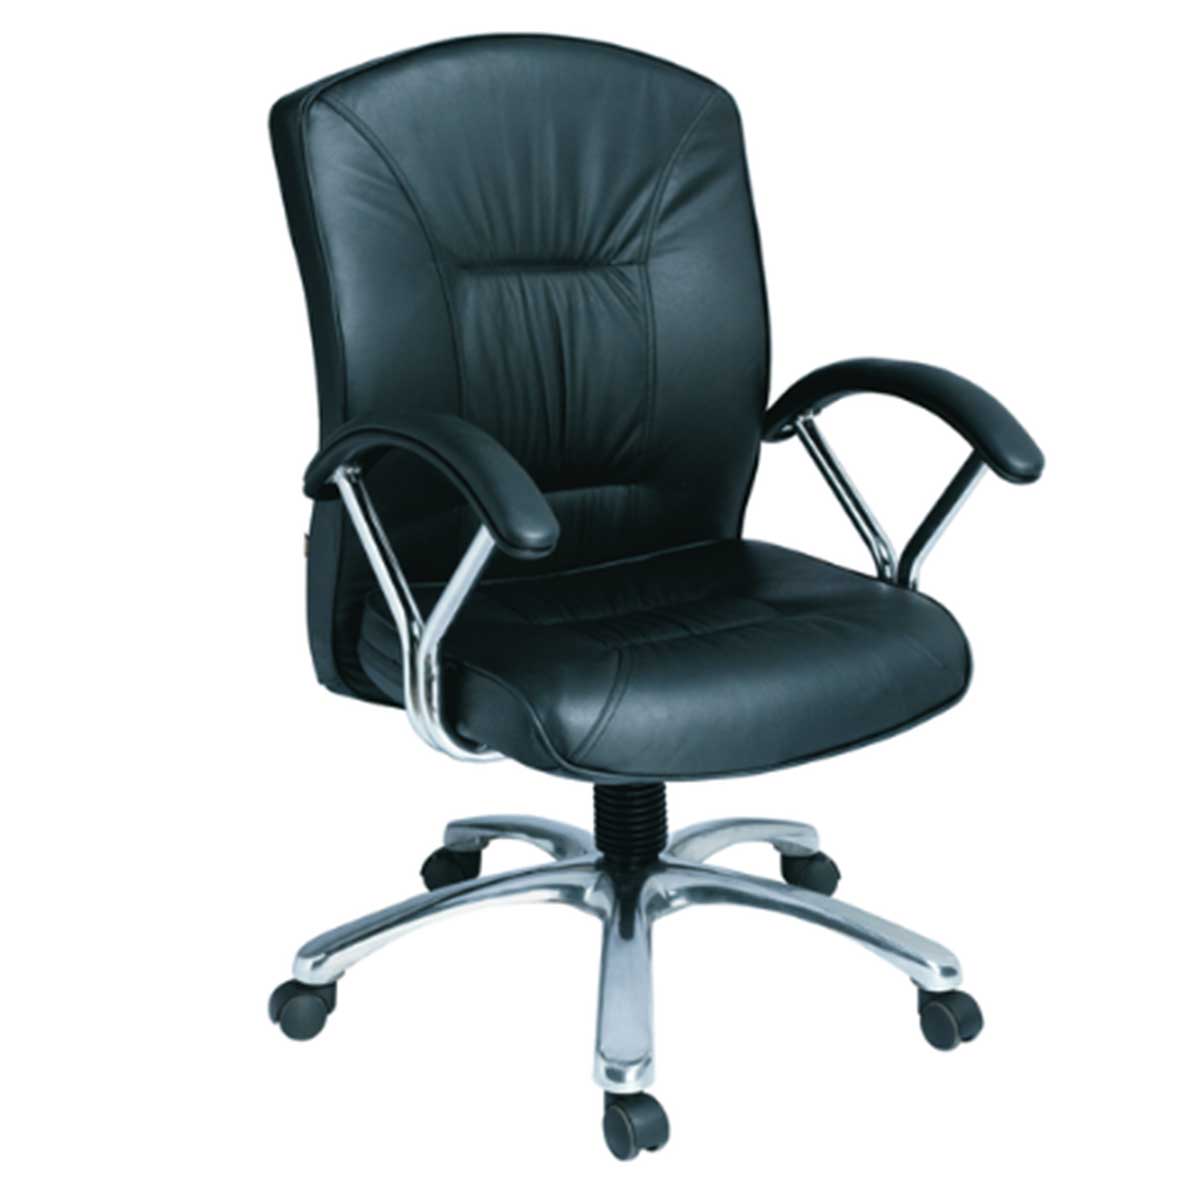 Executive Chair Manufacturers, Suppliers, Exporters in Delhi 